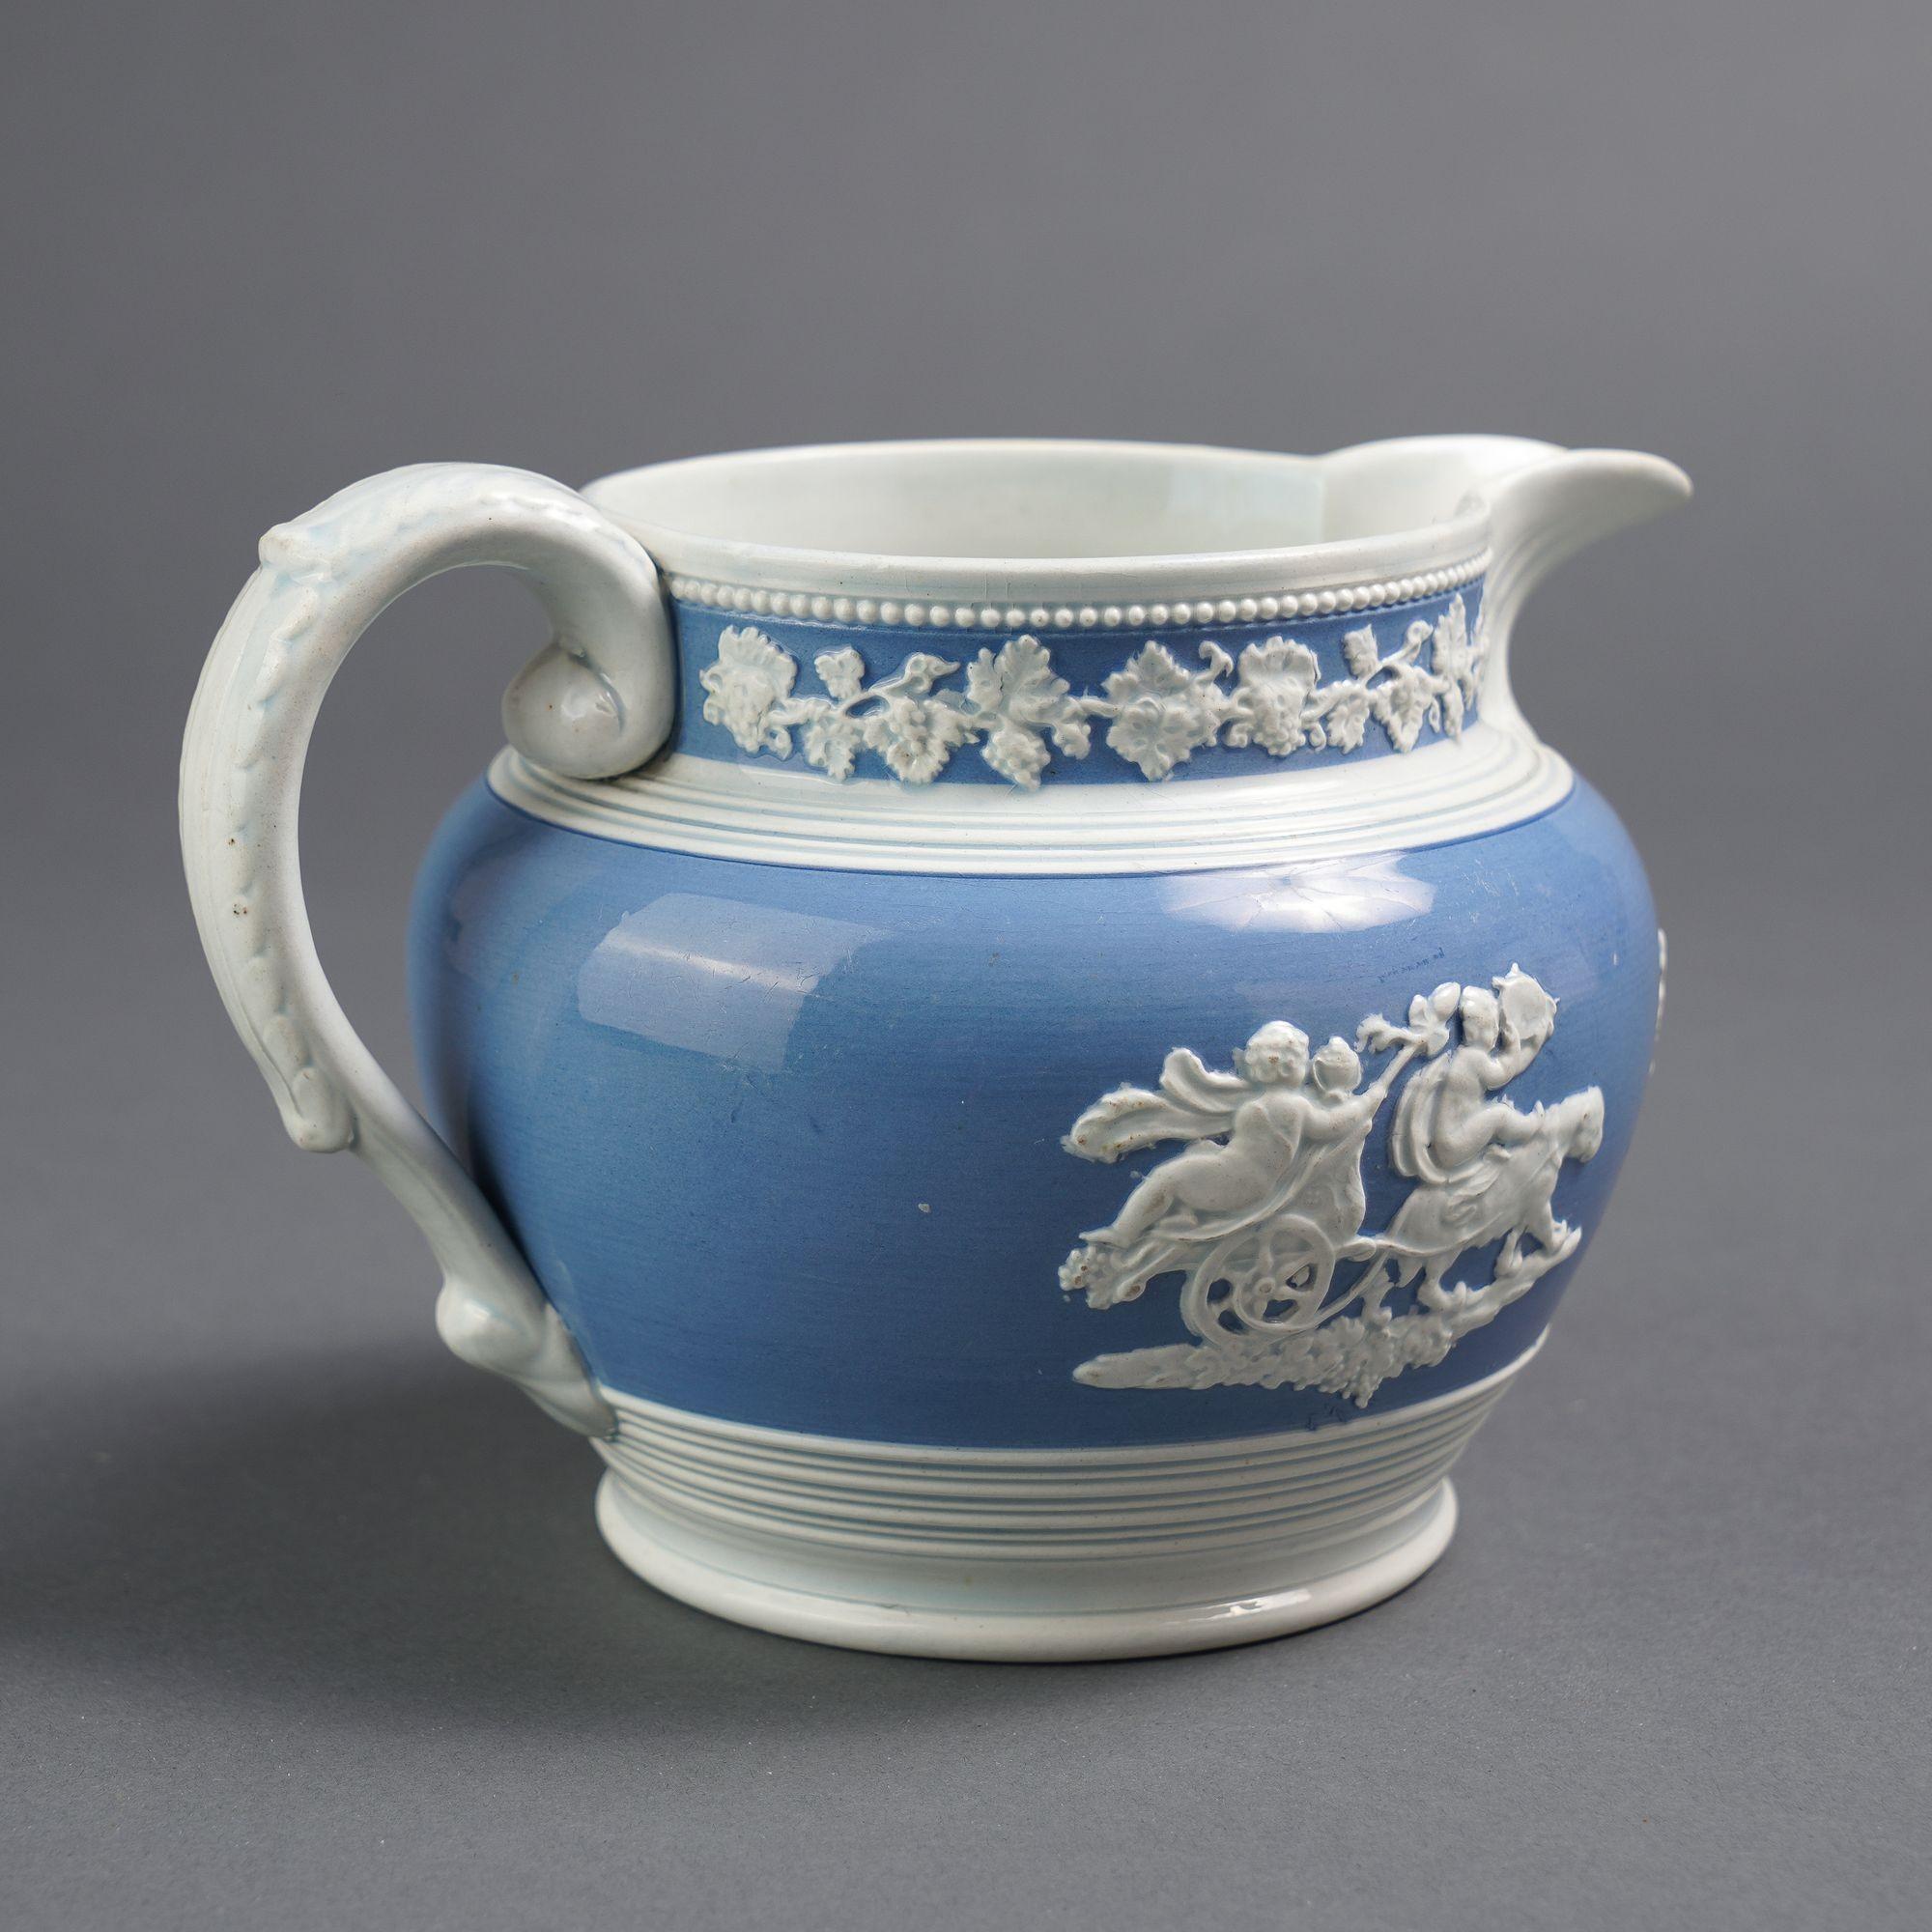 English Staffordshire pearlware pitcher by Chetham & Woolley, 1820-30 In Good Condition For Sale In Kenilworth, IL